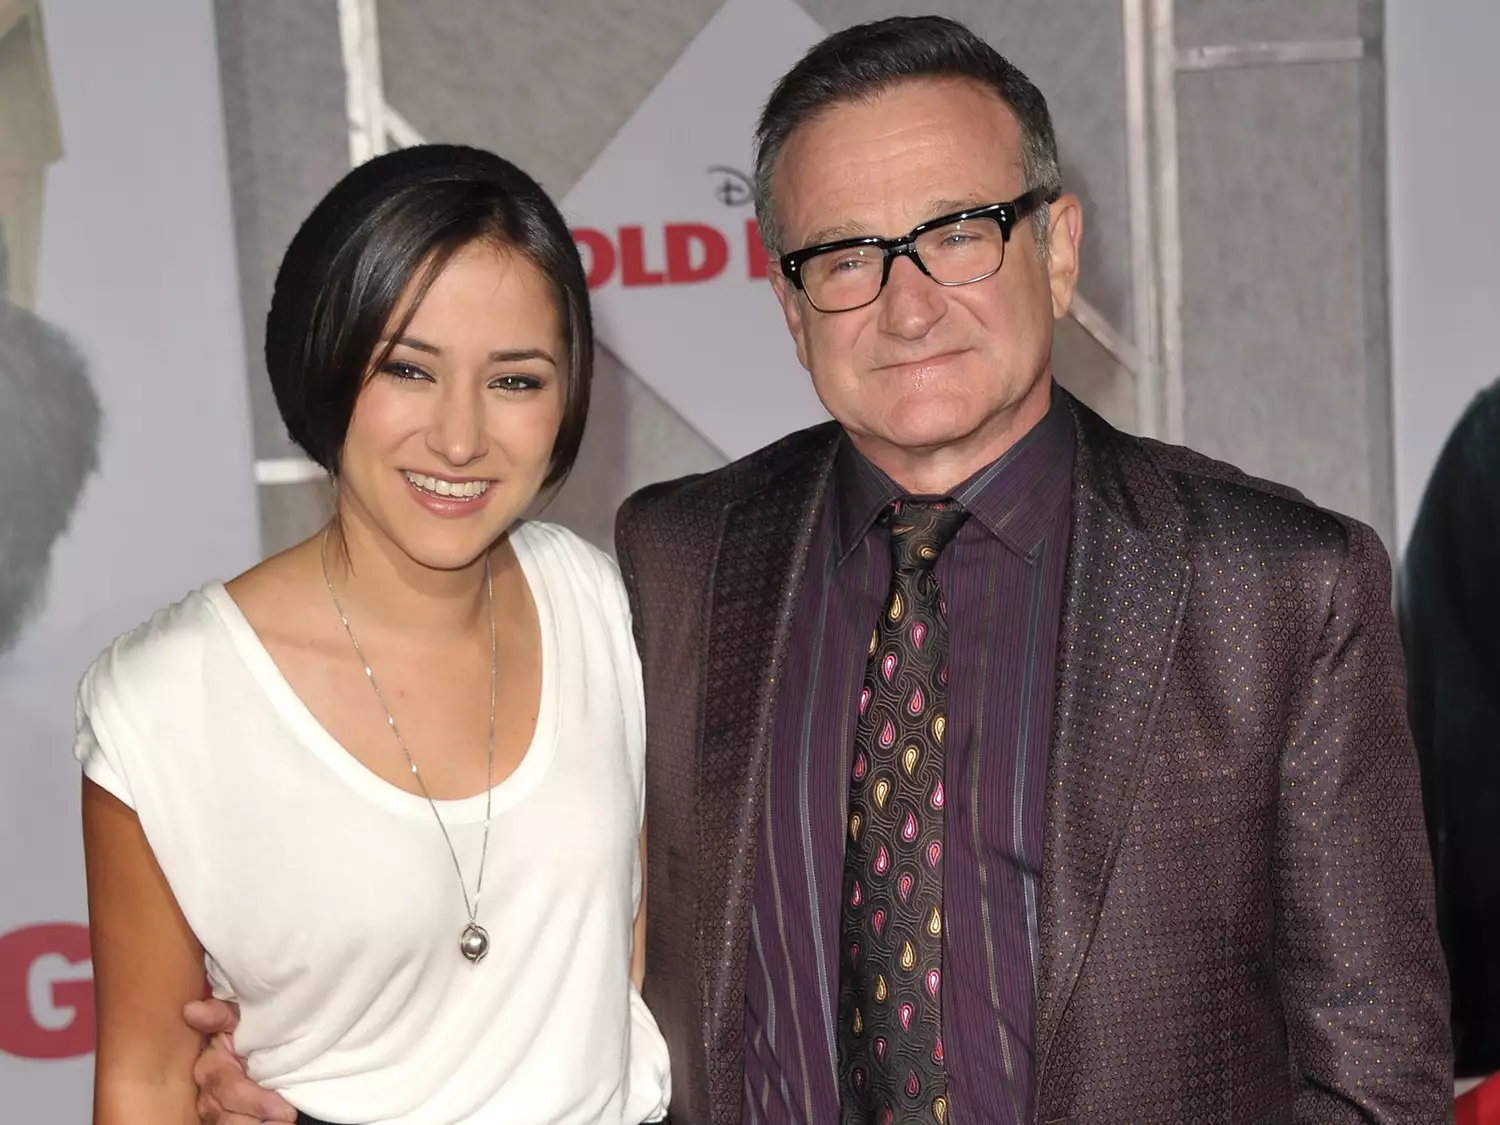 Zelda Williams and Robin Williams arrive at the "Old Dogs" Premiere